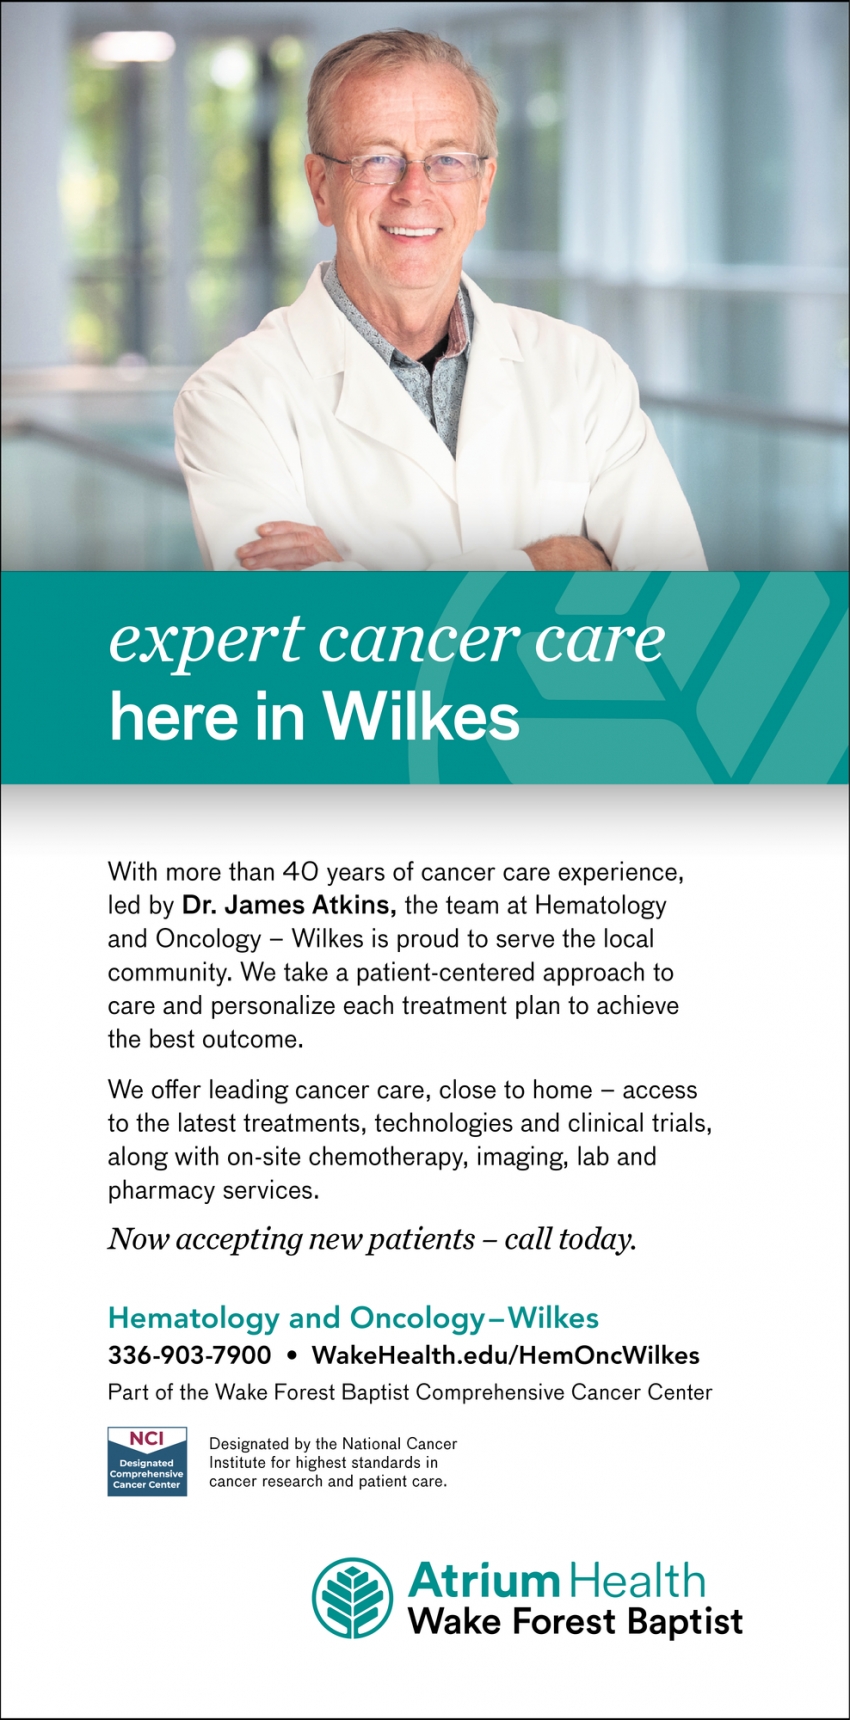 Expert In Cancer Care Here in Wilkes